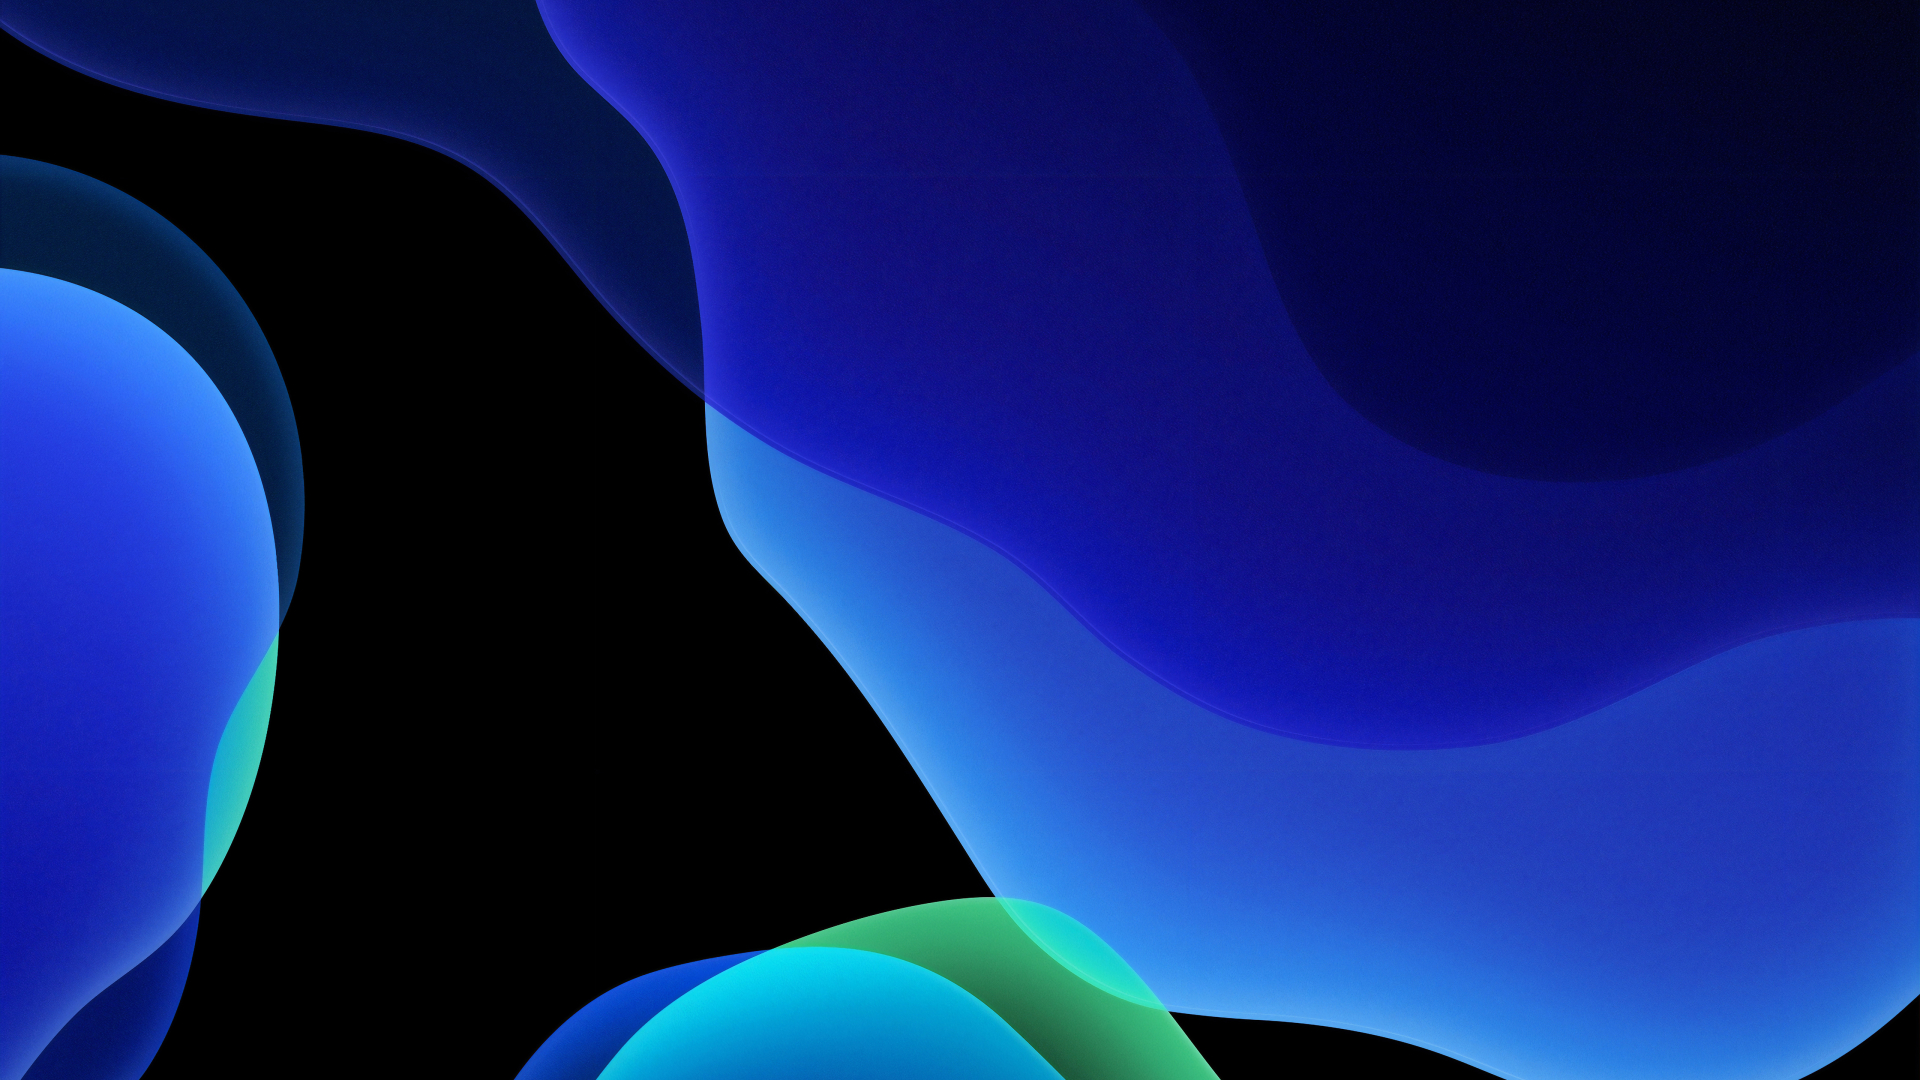 Blue Lights iPhone Wallpapers Free Download